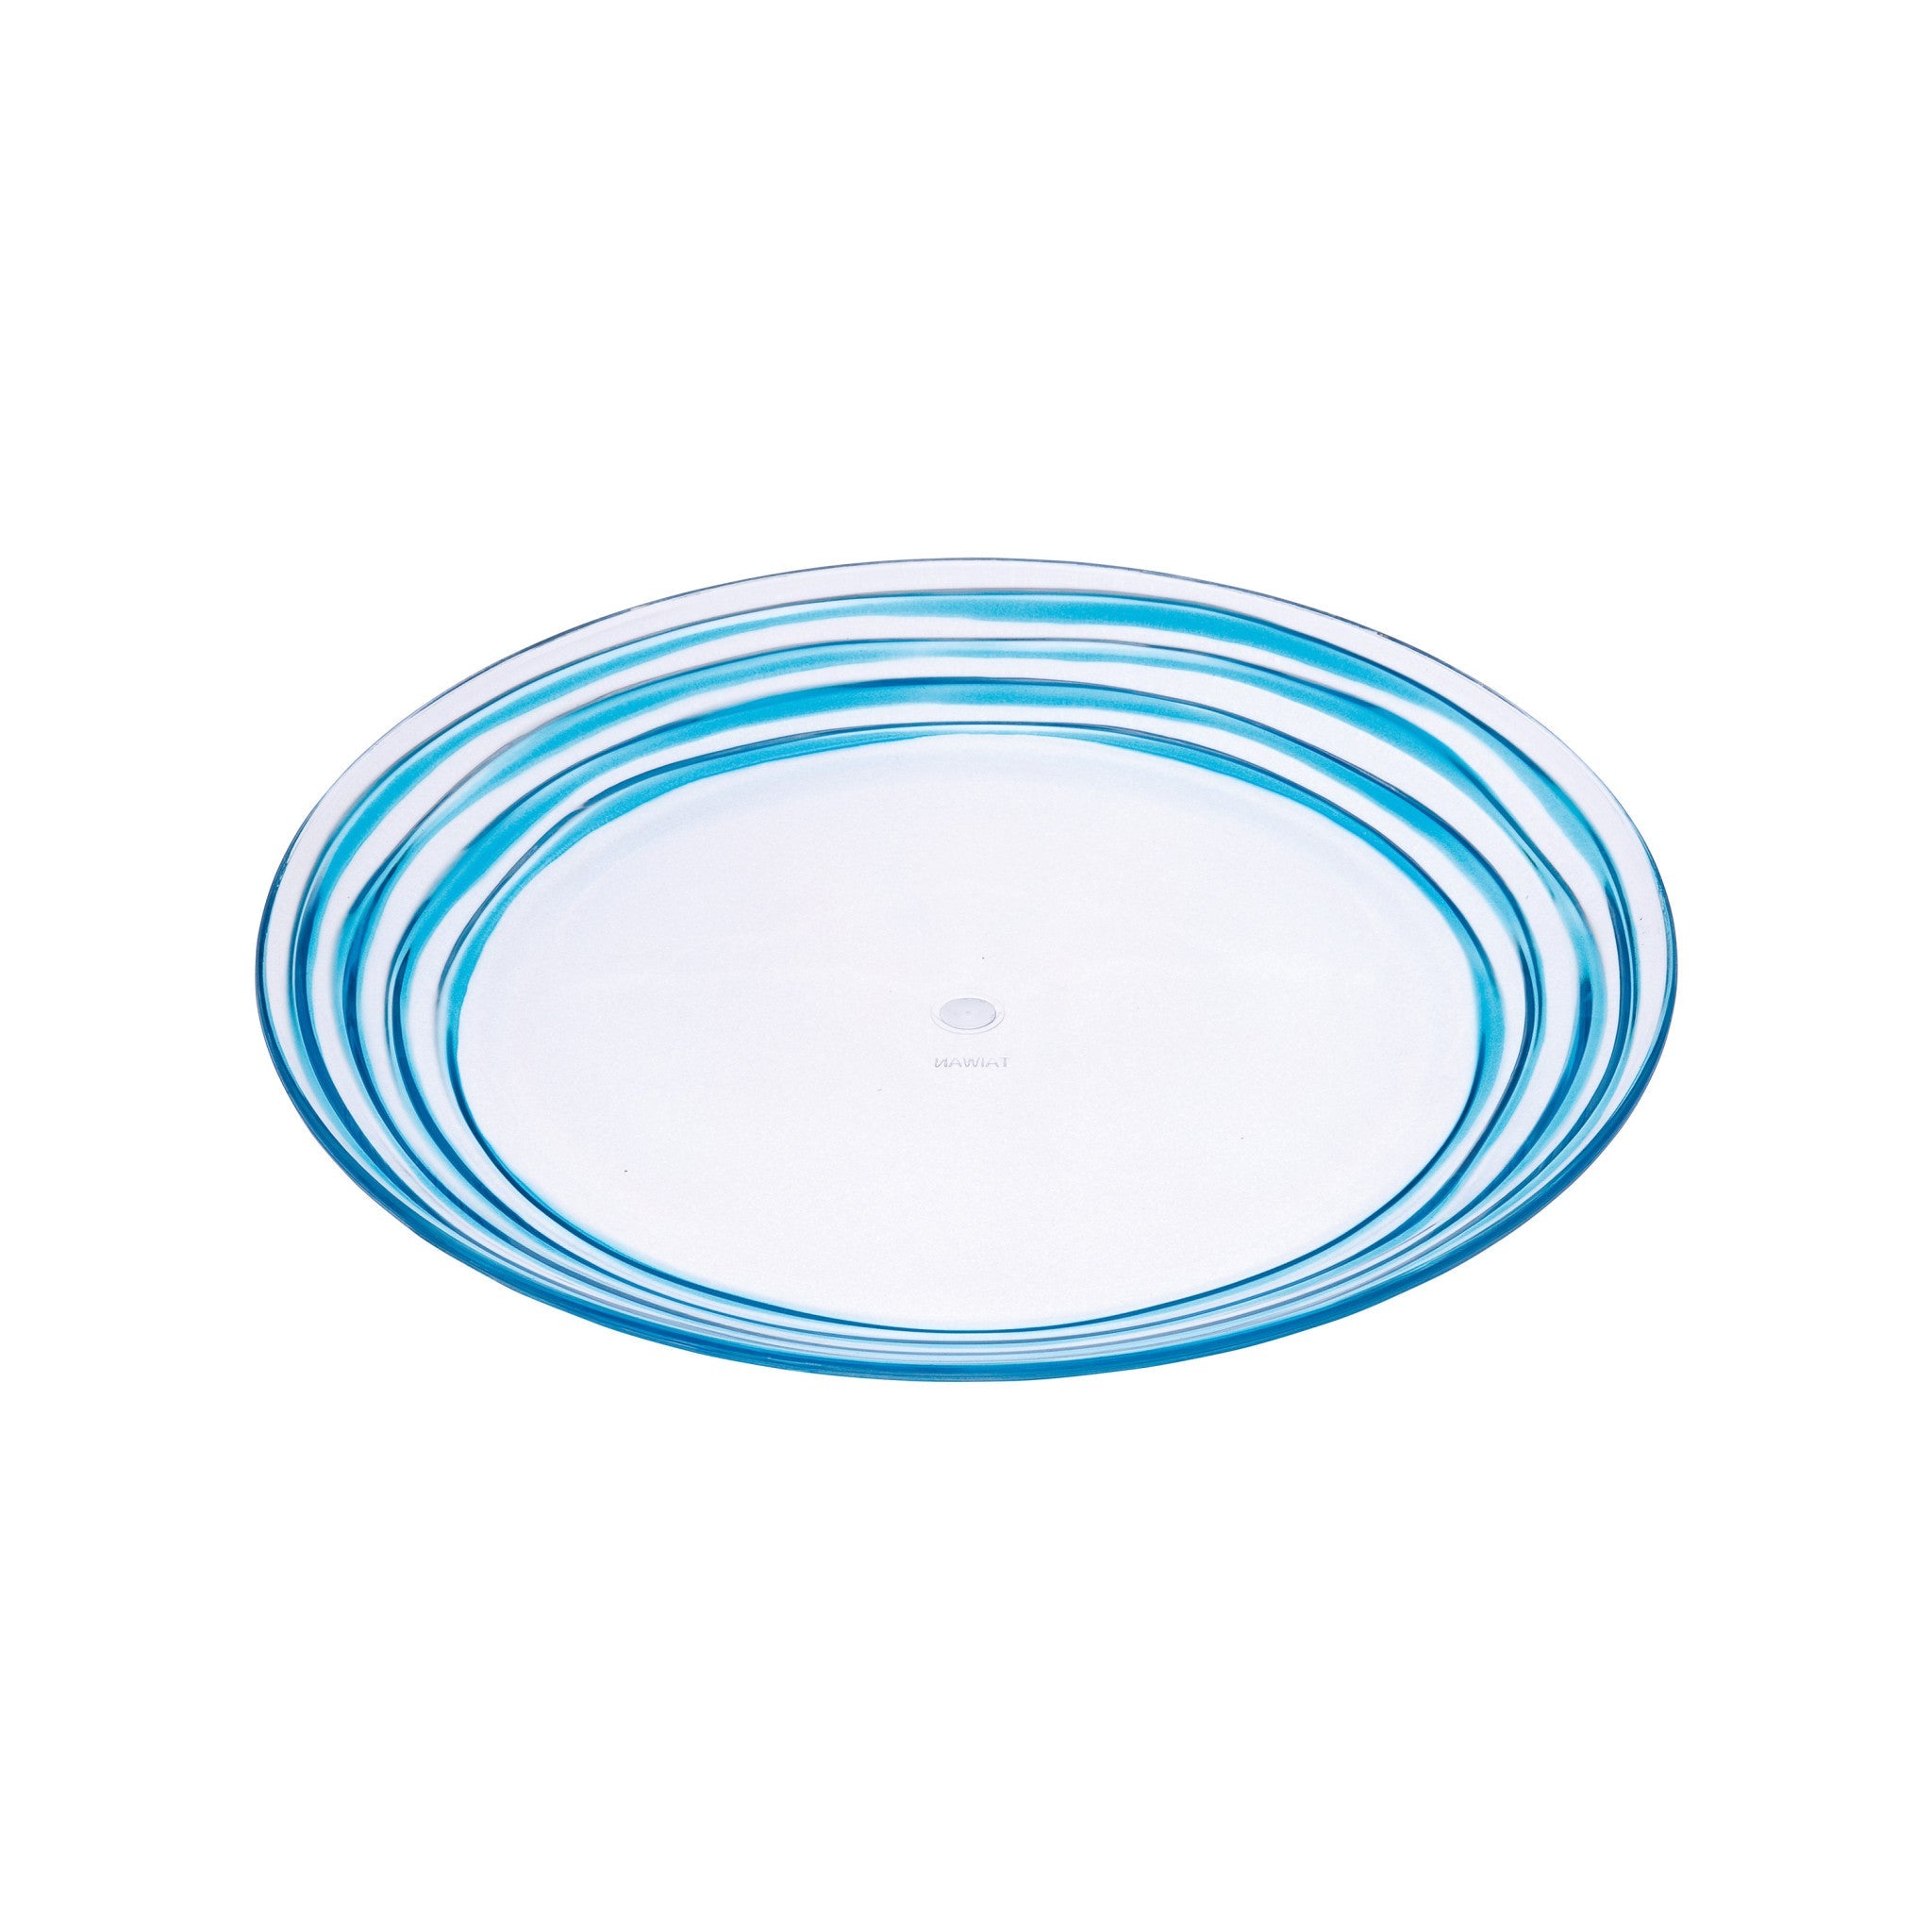 Blue-Four-Piece-Round-Swirl-Acrylic-Service-For-Four-Salad-Plate-Set-Dinnerware-Sets